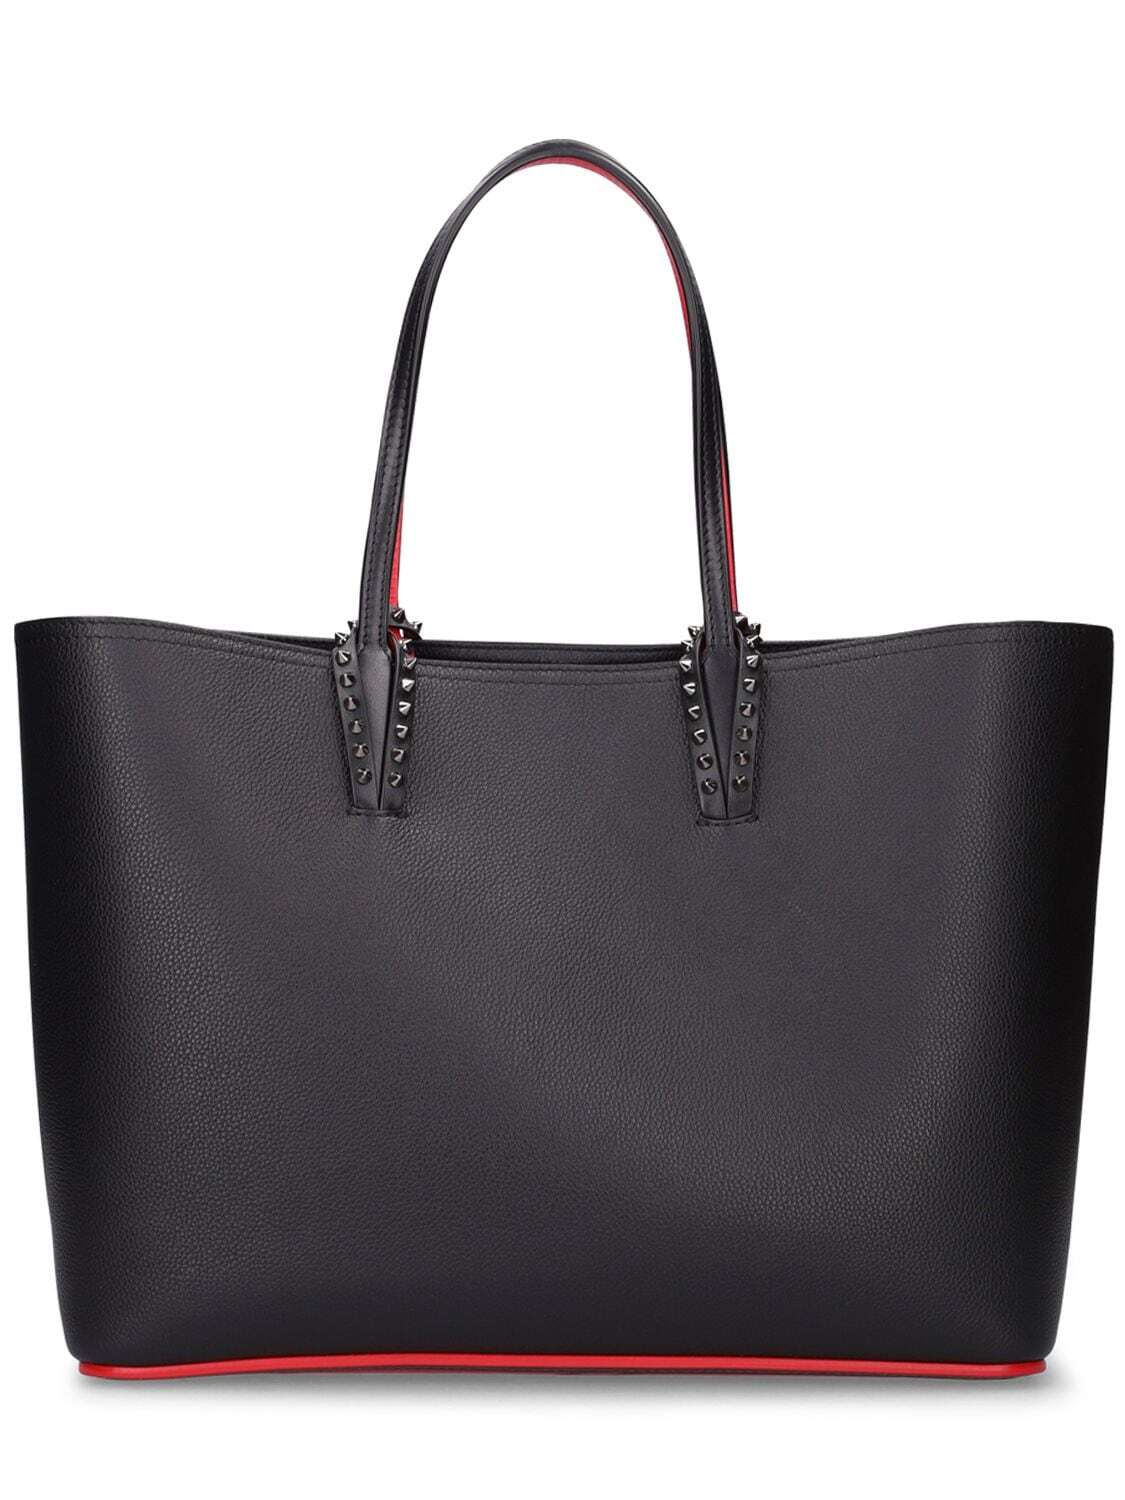 CHRISTIAN LOUBOUTIN Cabata Grained Leather Tote Bag in black